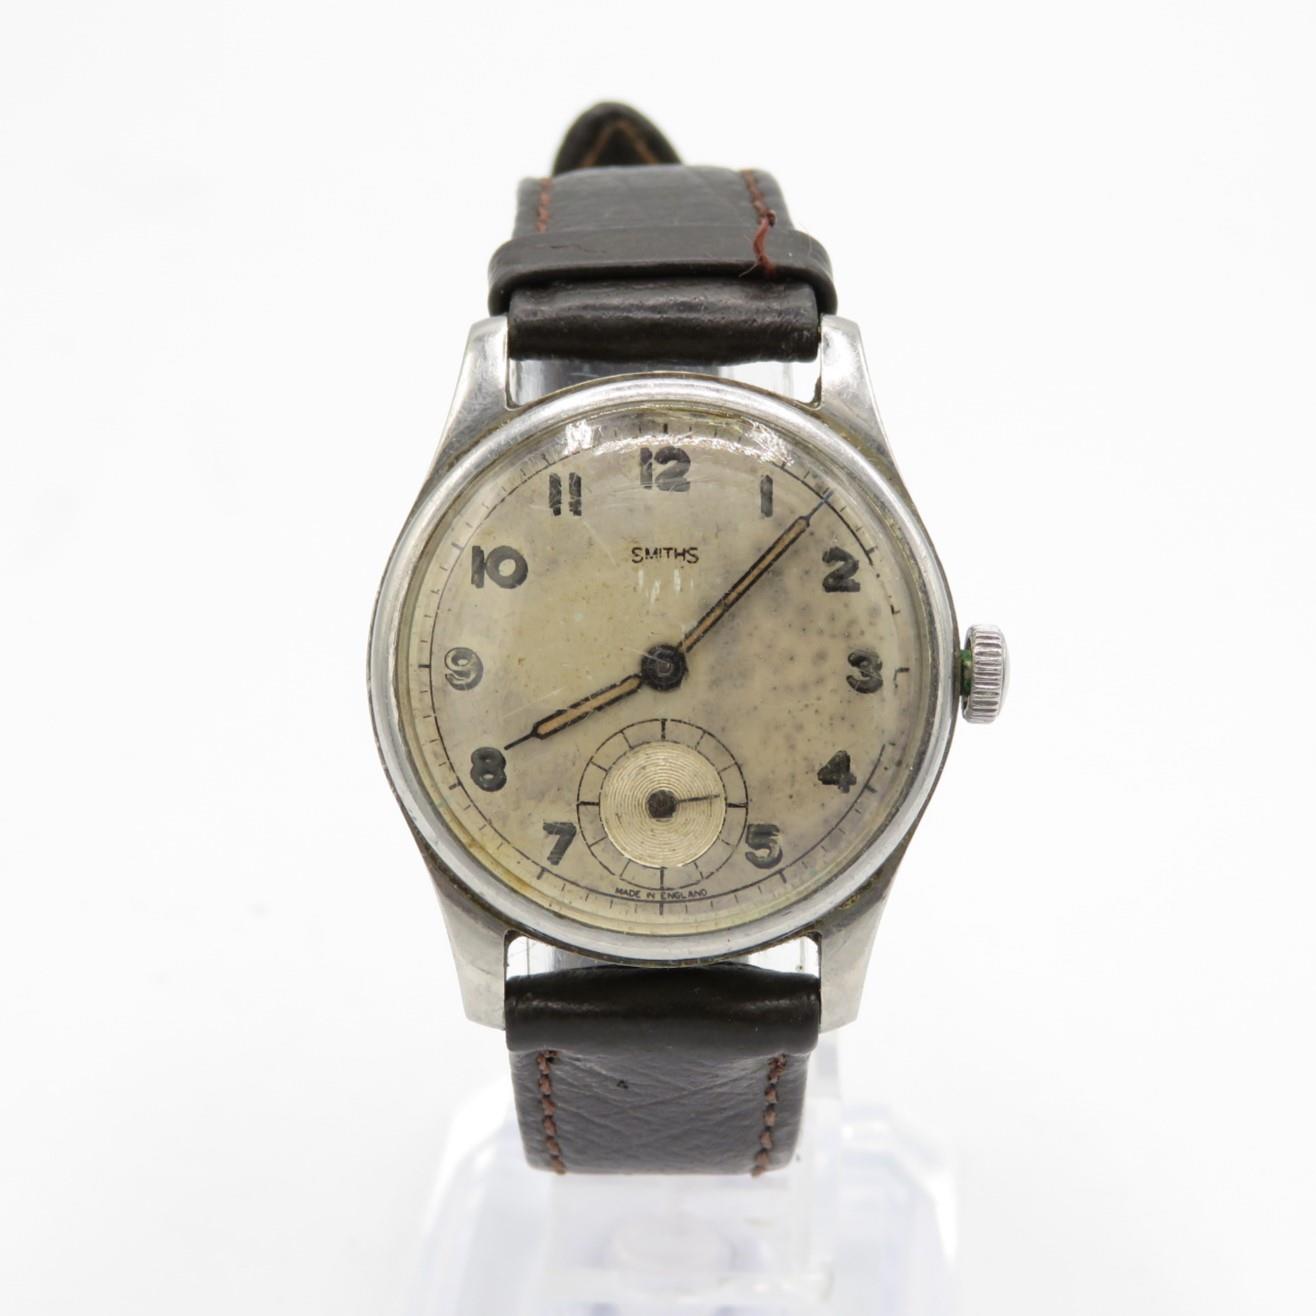 SMITHS Military Style Gents Vintage WRISTWATCH Hand-wind WORKING // SMITHS Military Style Gents